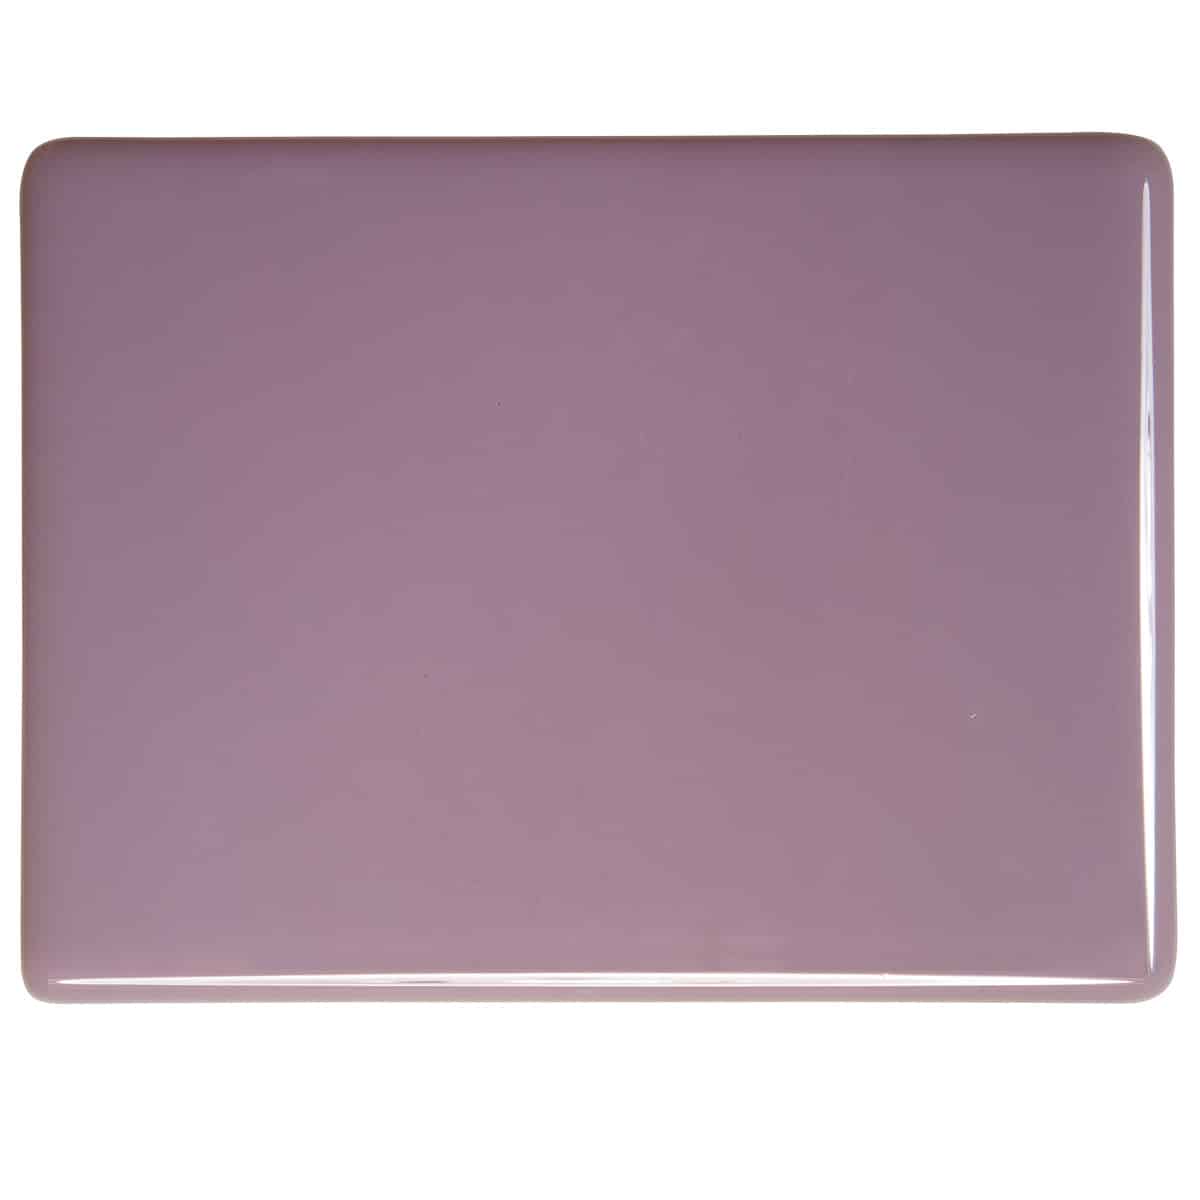 000303 Dusty Lilac Opalescent